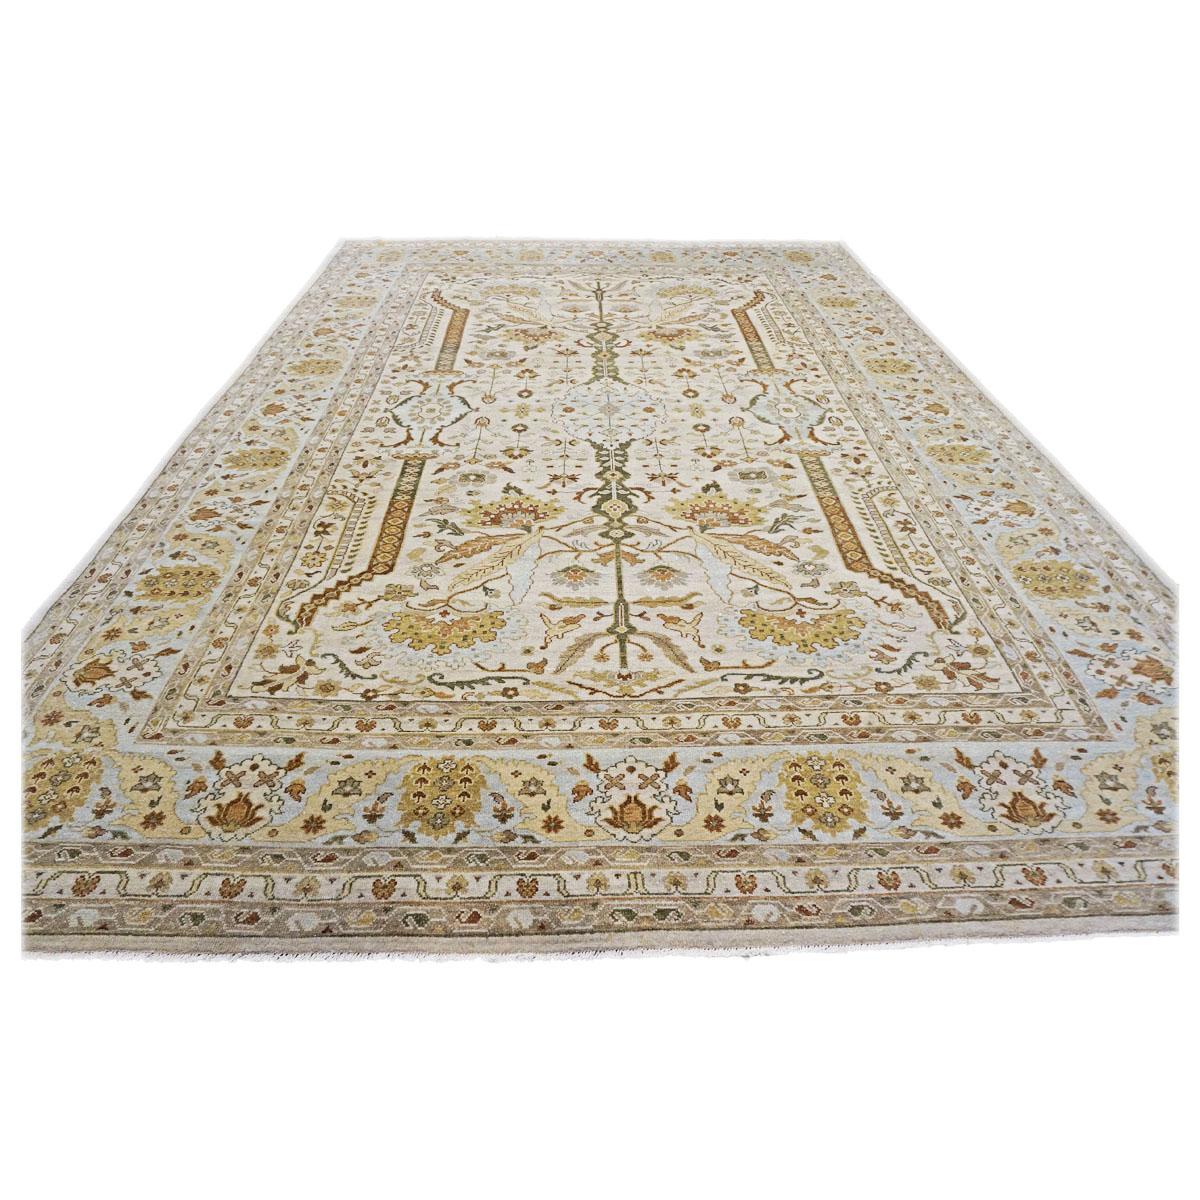  Ashly Fine Rugs presents an antique recreation of an original Persian Sultanabad. Part of our own previous production, this antique recreation was thought of and created in-house and 100% handmade in Afghanistan by master weavers. Sultanabads are